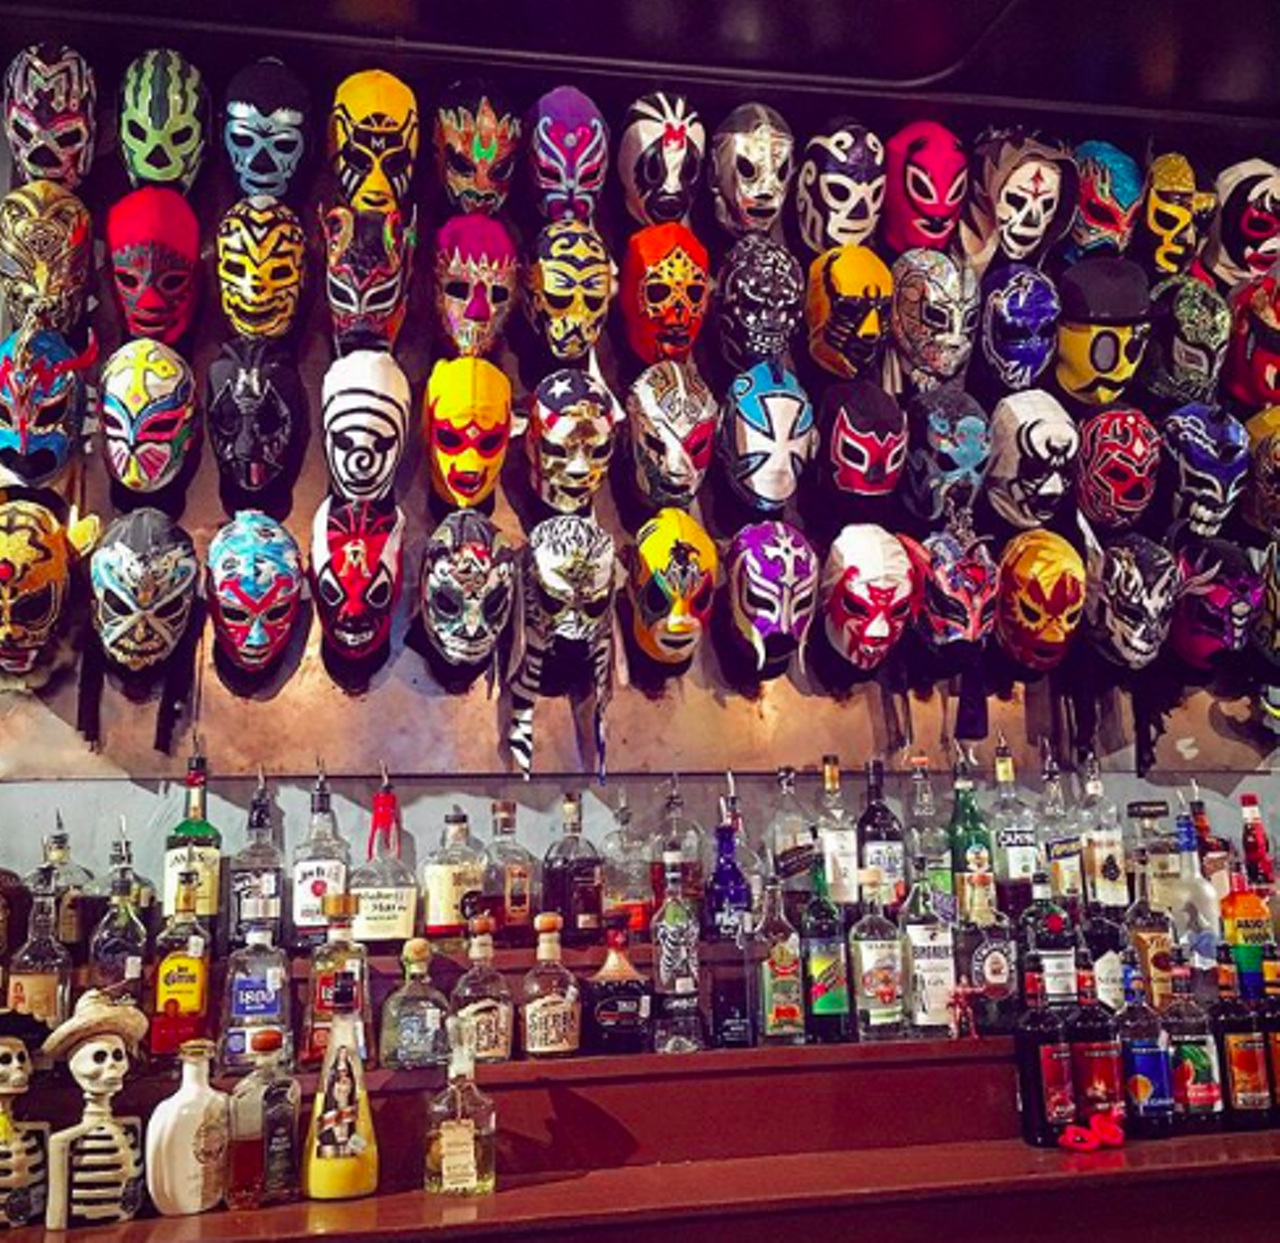 El Luchador
622 Roosevelt Ave, (210) 272-0016, facebook.com
Bow down to el supreme luchador! You’ll love the Lucha Libre theme and let loose with the cocktail menu and weekly DJ takeovers.
Photo via Instagram / chachaluxedevil